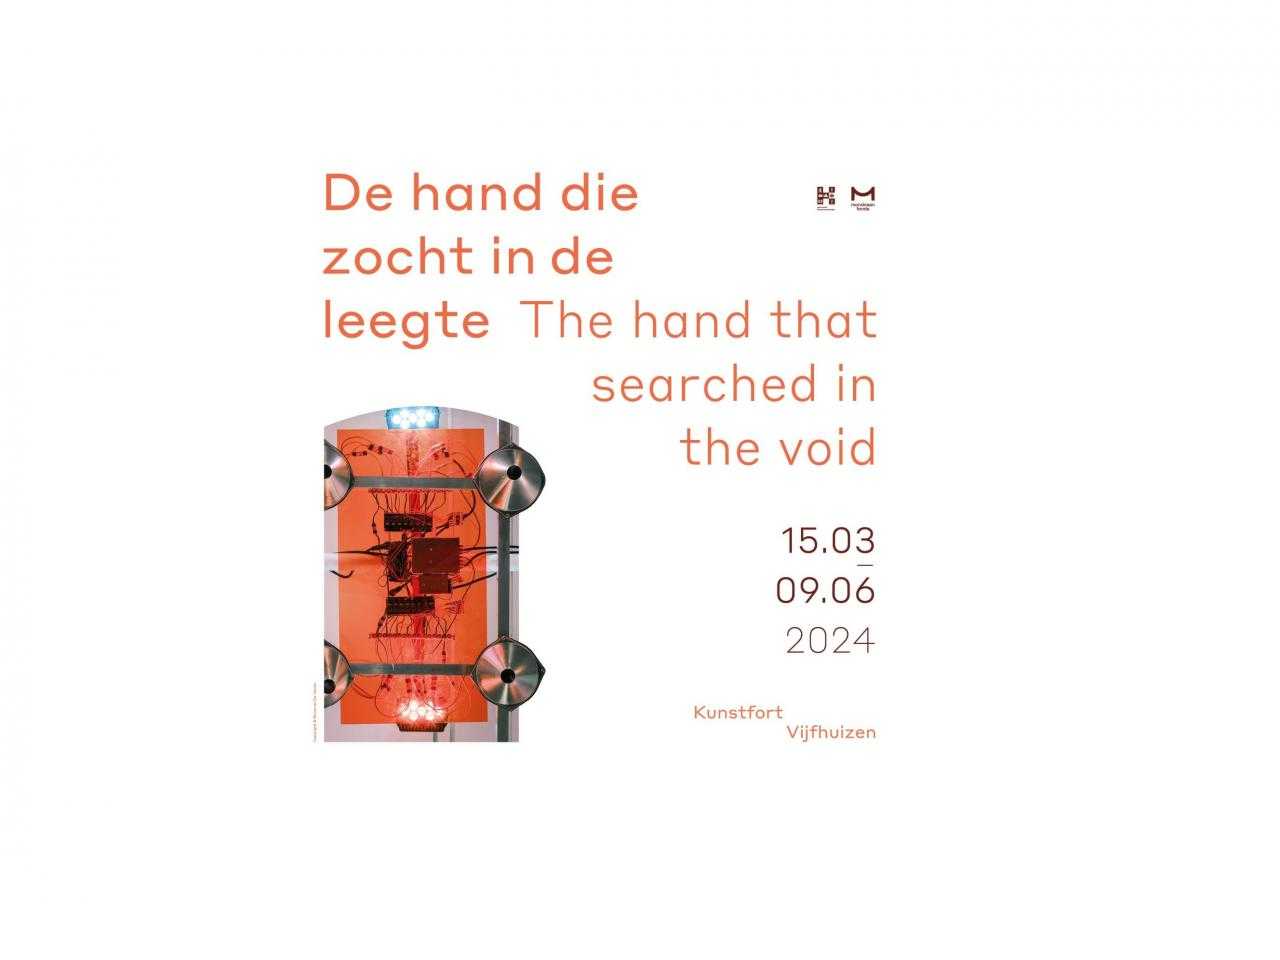 Kunstfort Vijfhuizen - the hand that searched in the void